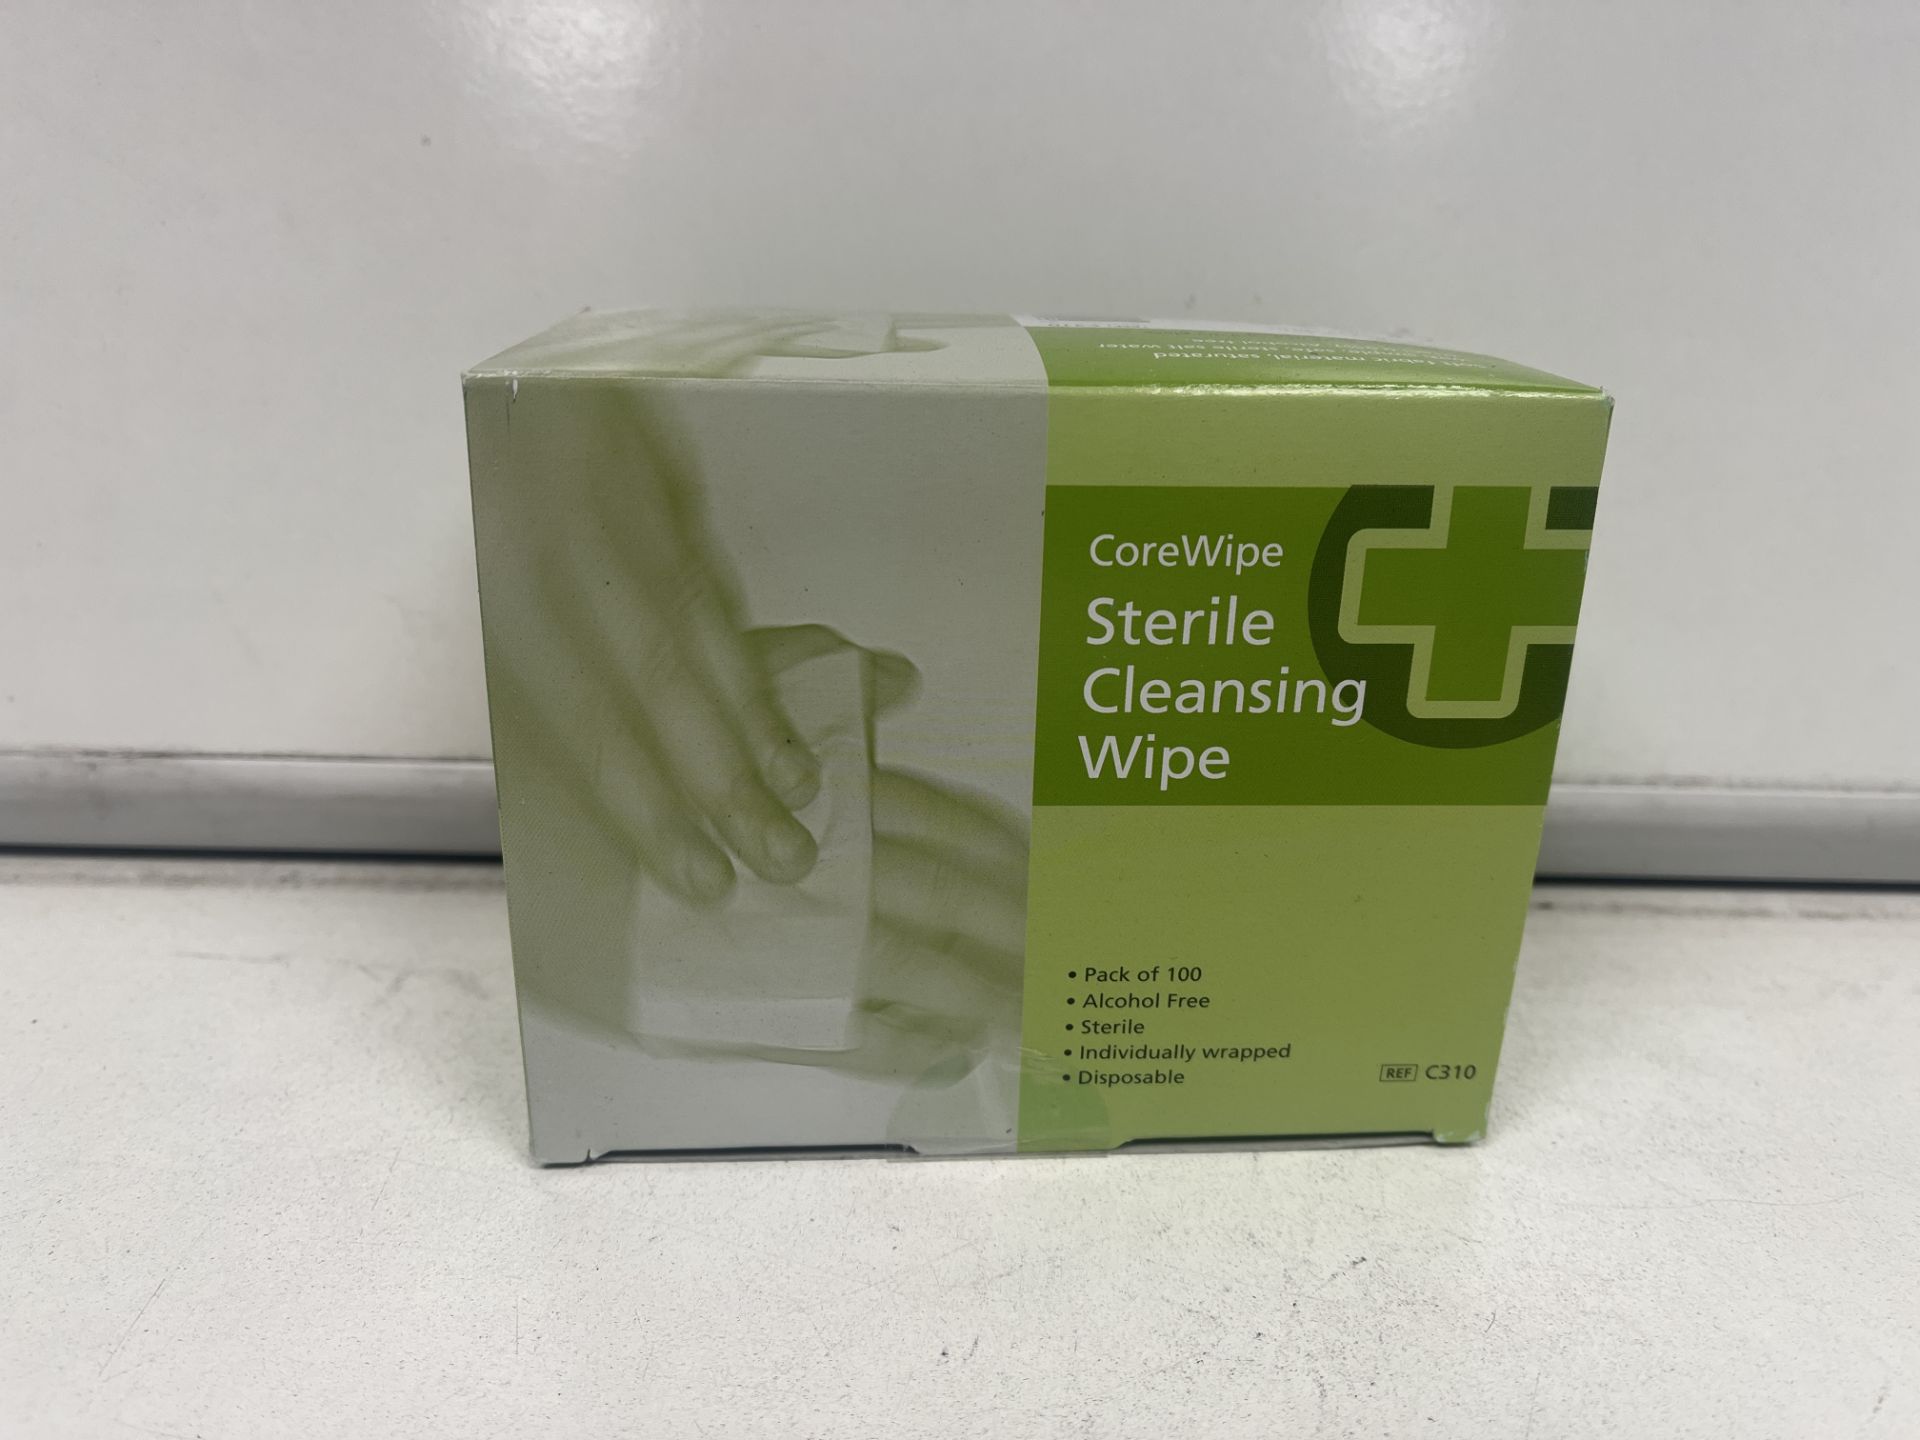 80 X BRAND NEW PACKS OF 100 COREWIPE STERILE CLEANSING WIPES R9-10